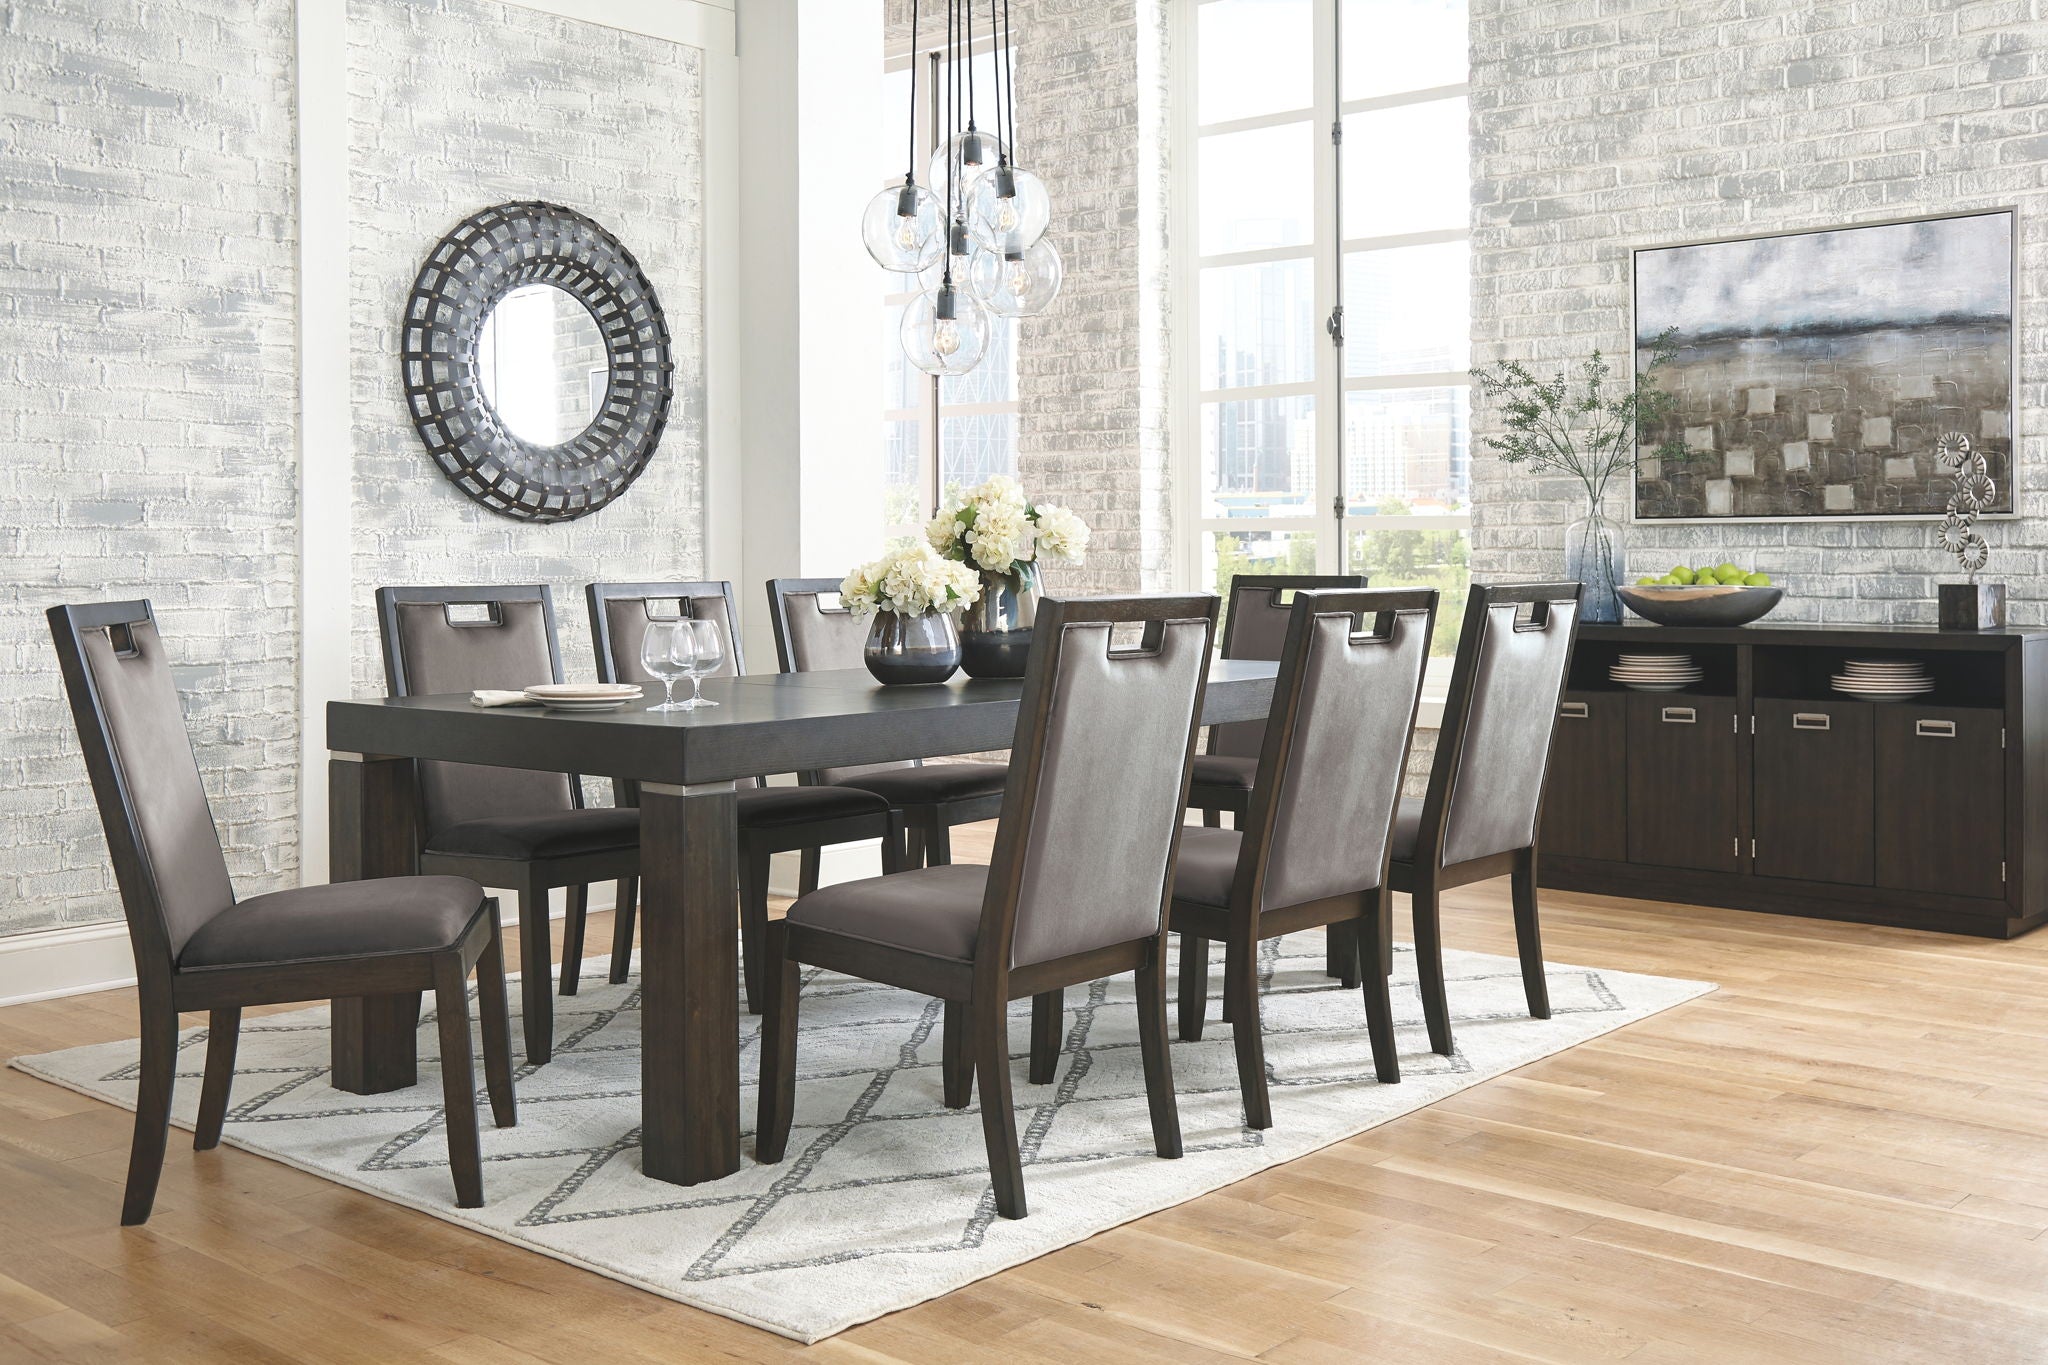 Minimalist Dining Room Furniture Calgary for Large Space